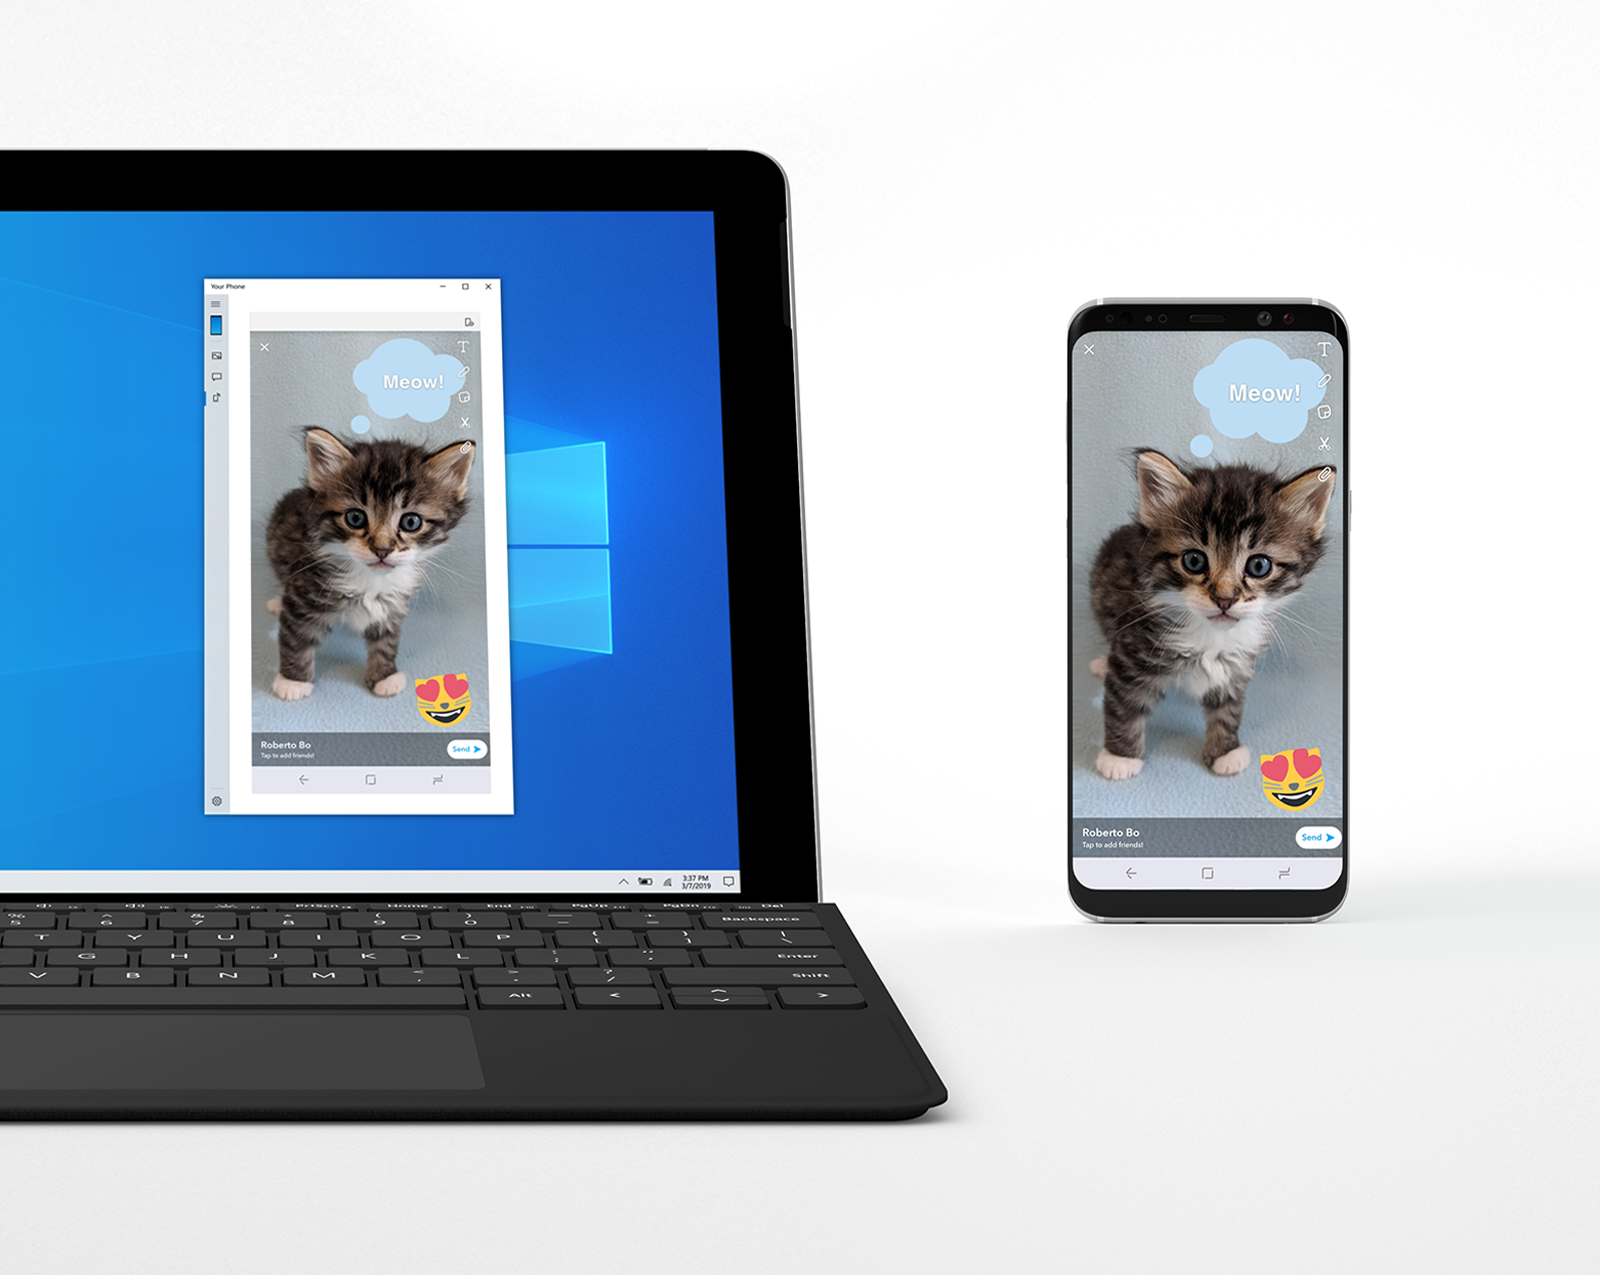 Showing a picture of a cat on a phone, and that same picture of a cat is visible in the Your Phone window on a laptop next to it